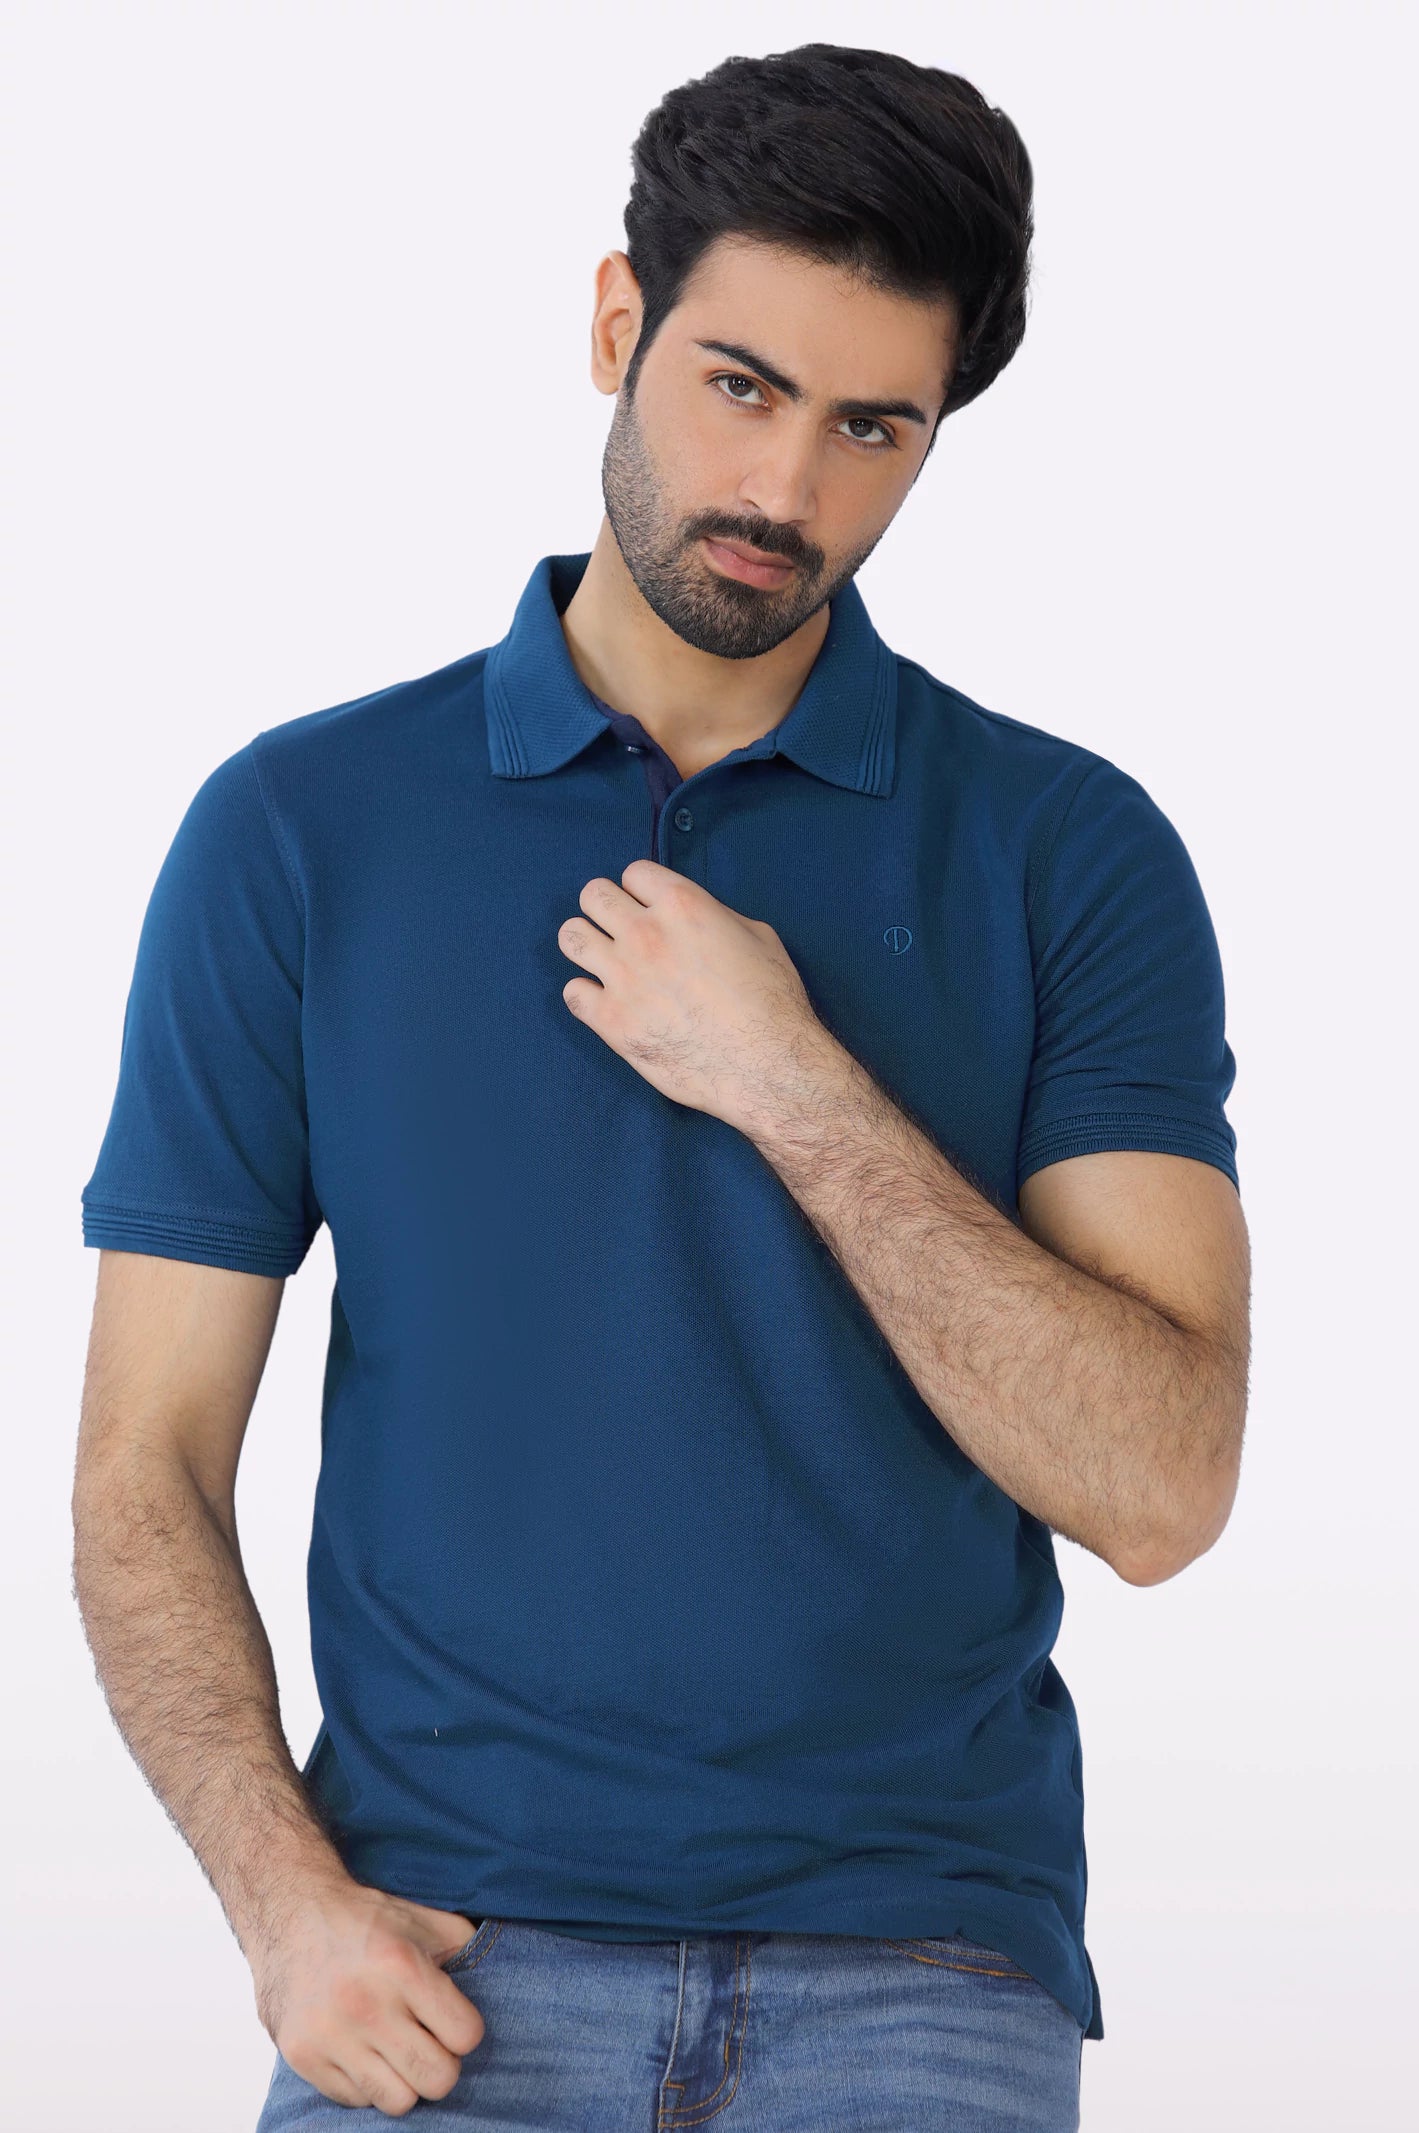 Jacquard Collar Polo From Diners